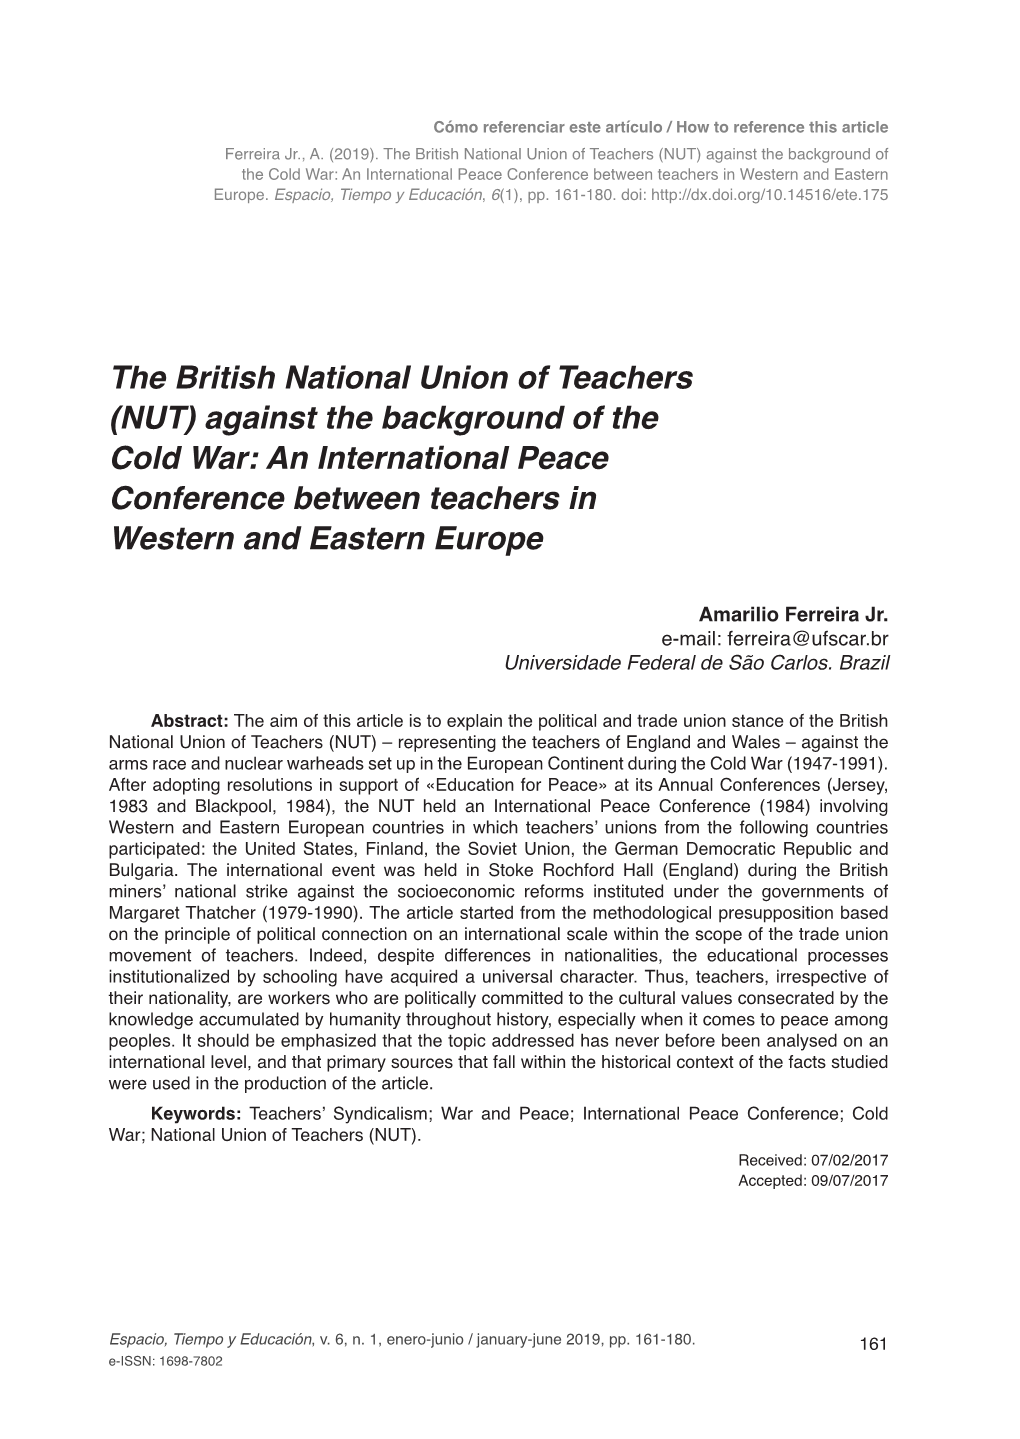 The British National Union of Teachers (NUT) Against the Background of the Cold War: an International Peace Conference Between Teachers in Western and Eastern Europe